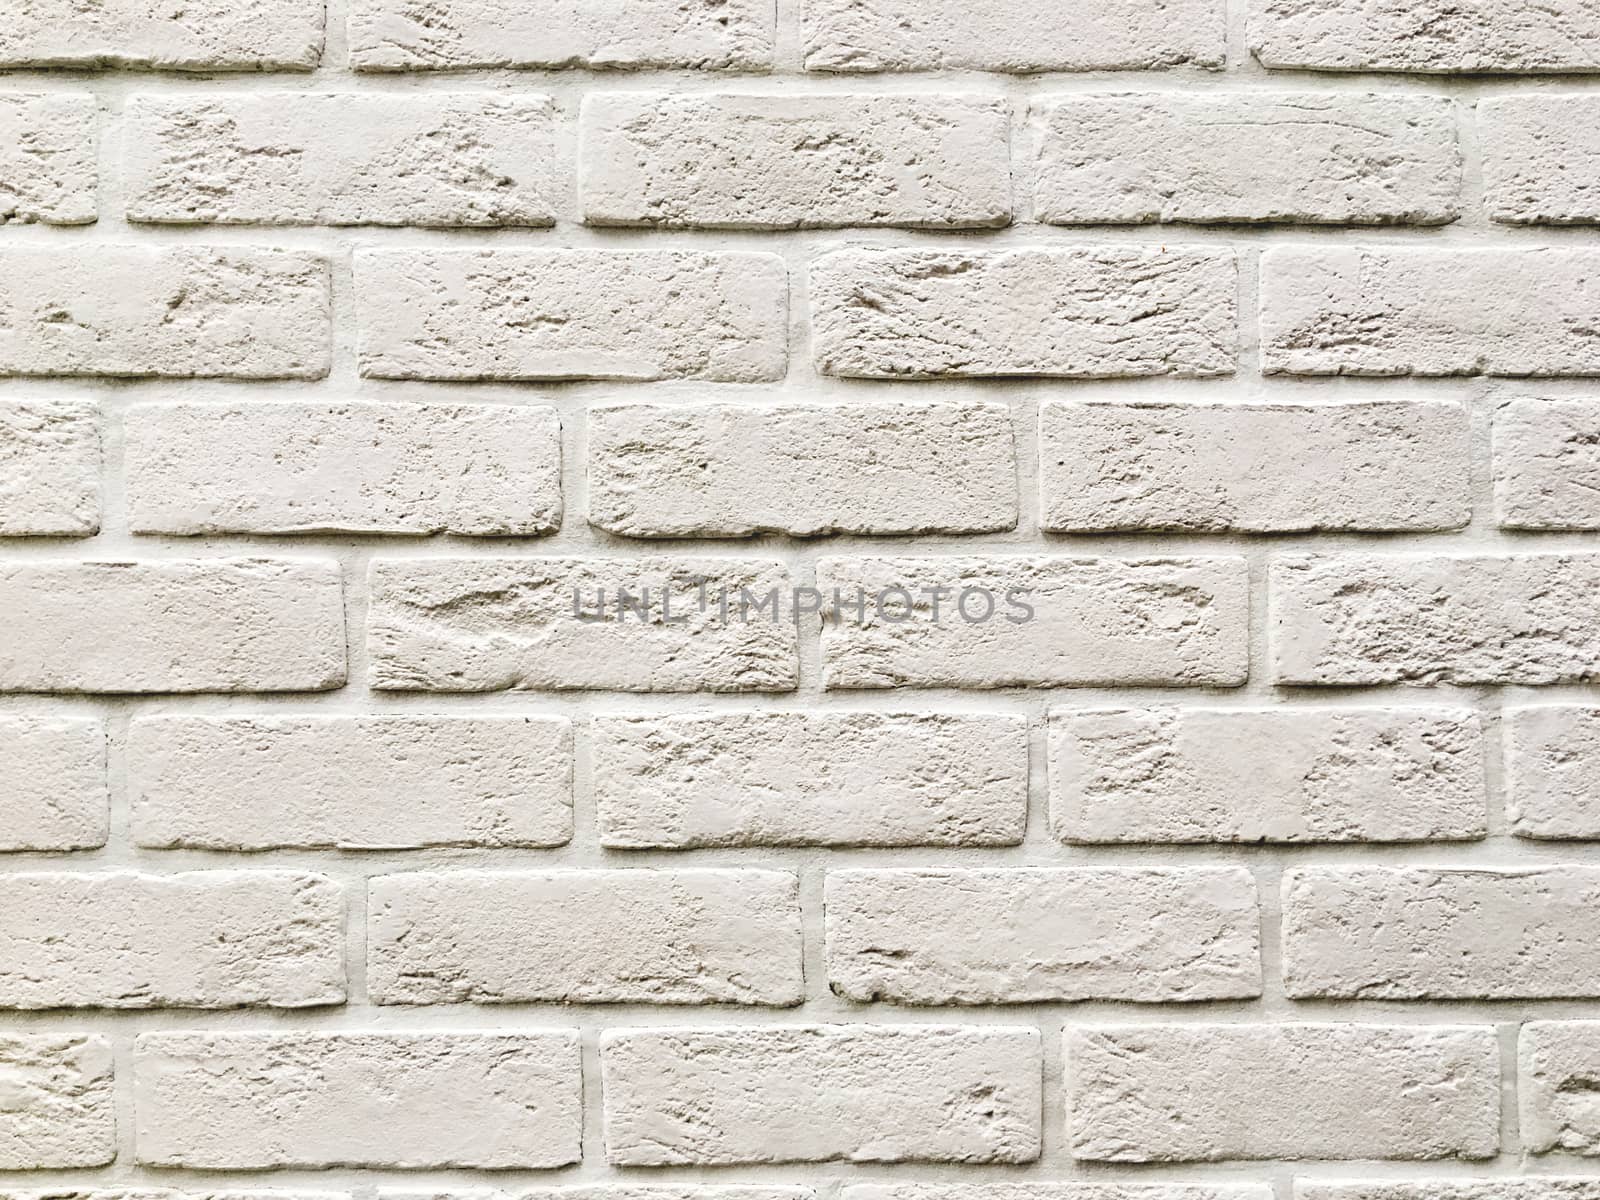 Outdoor wall made of white bricks. Stone texture of building wall.